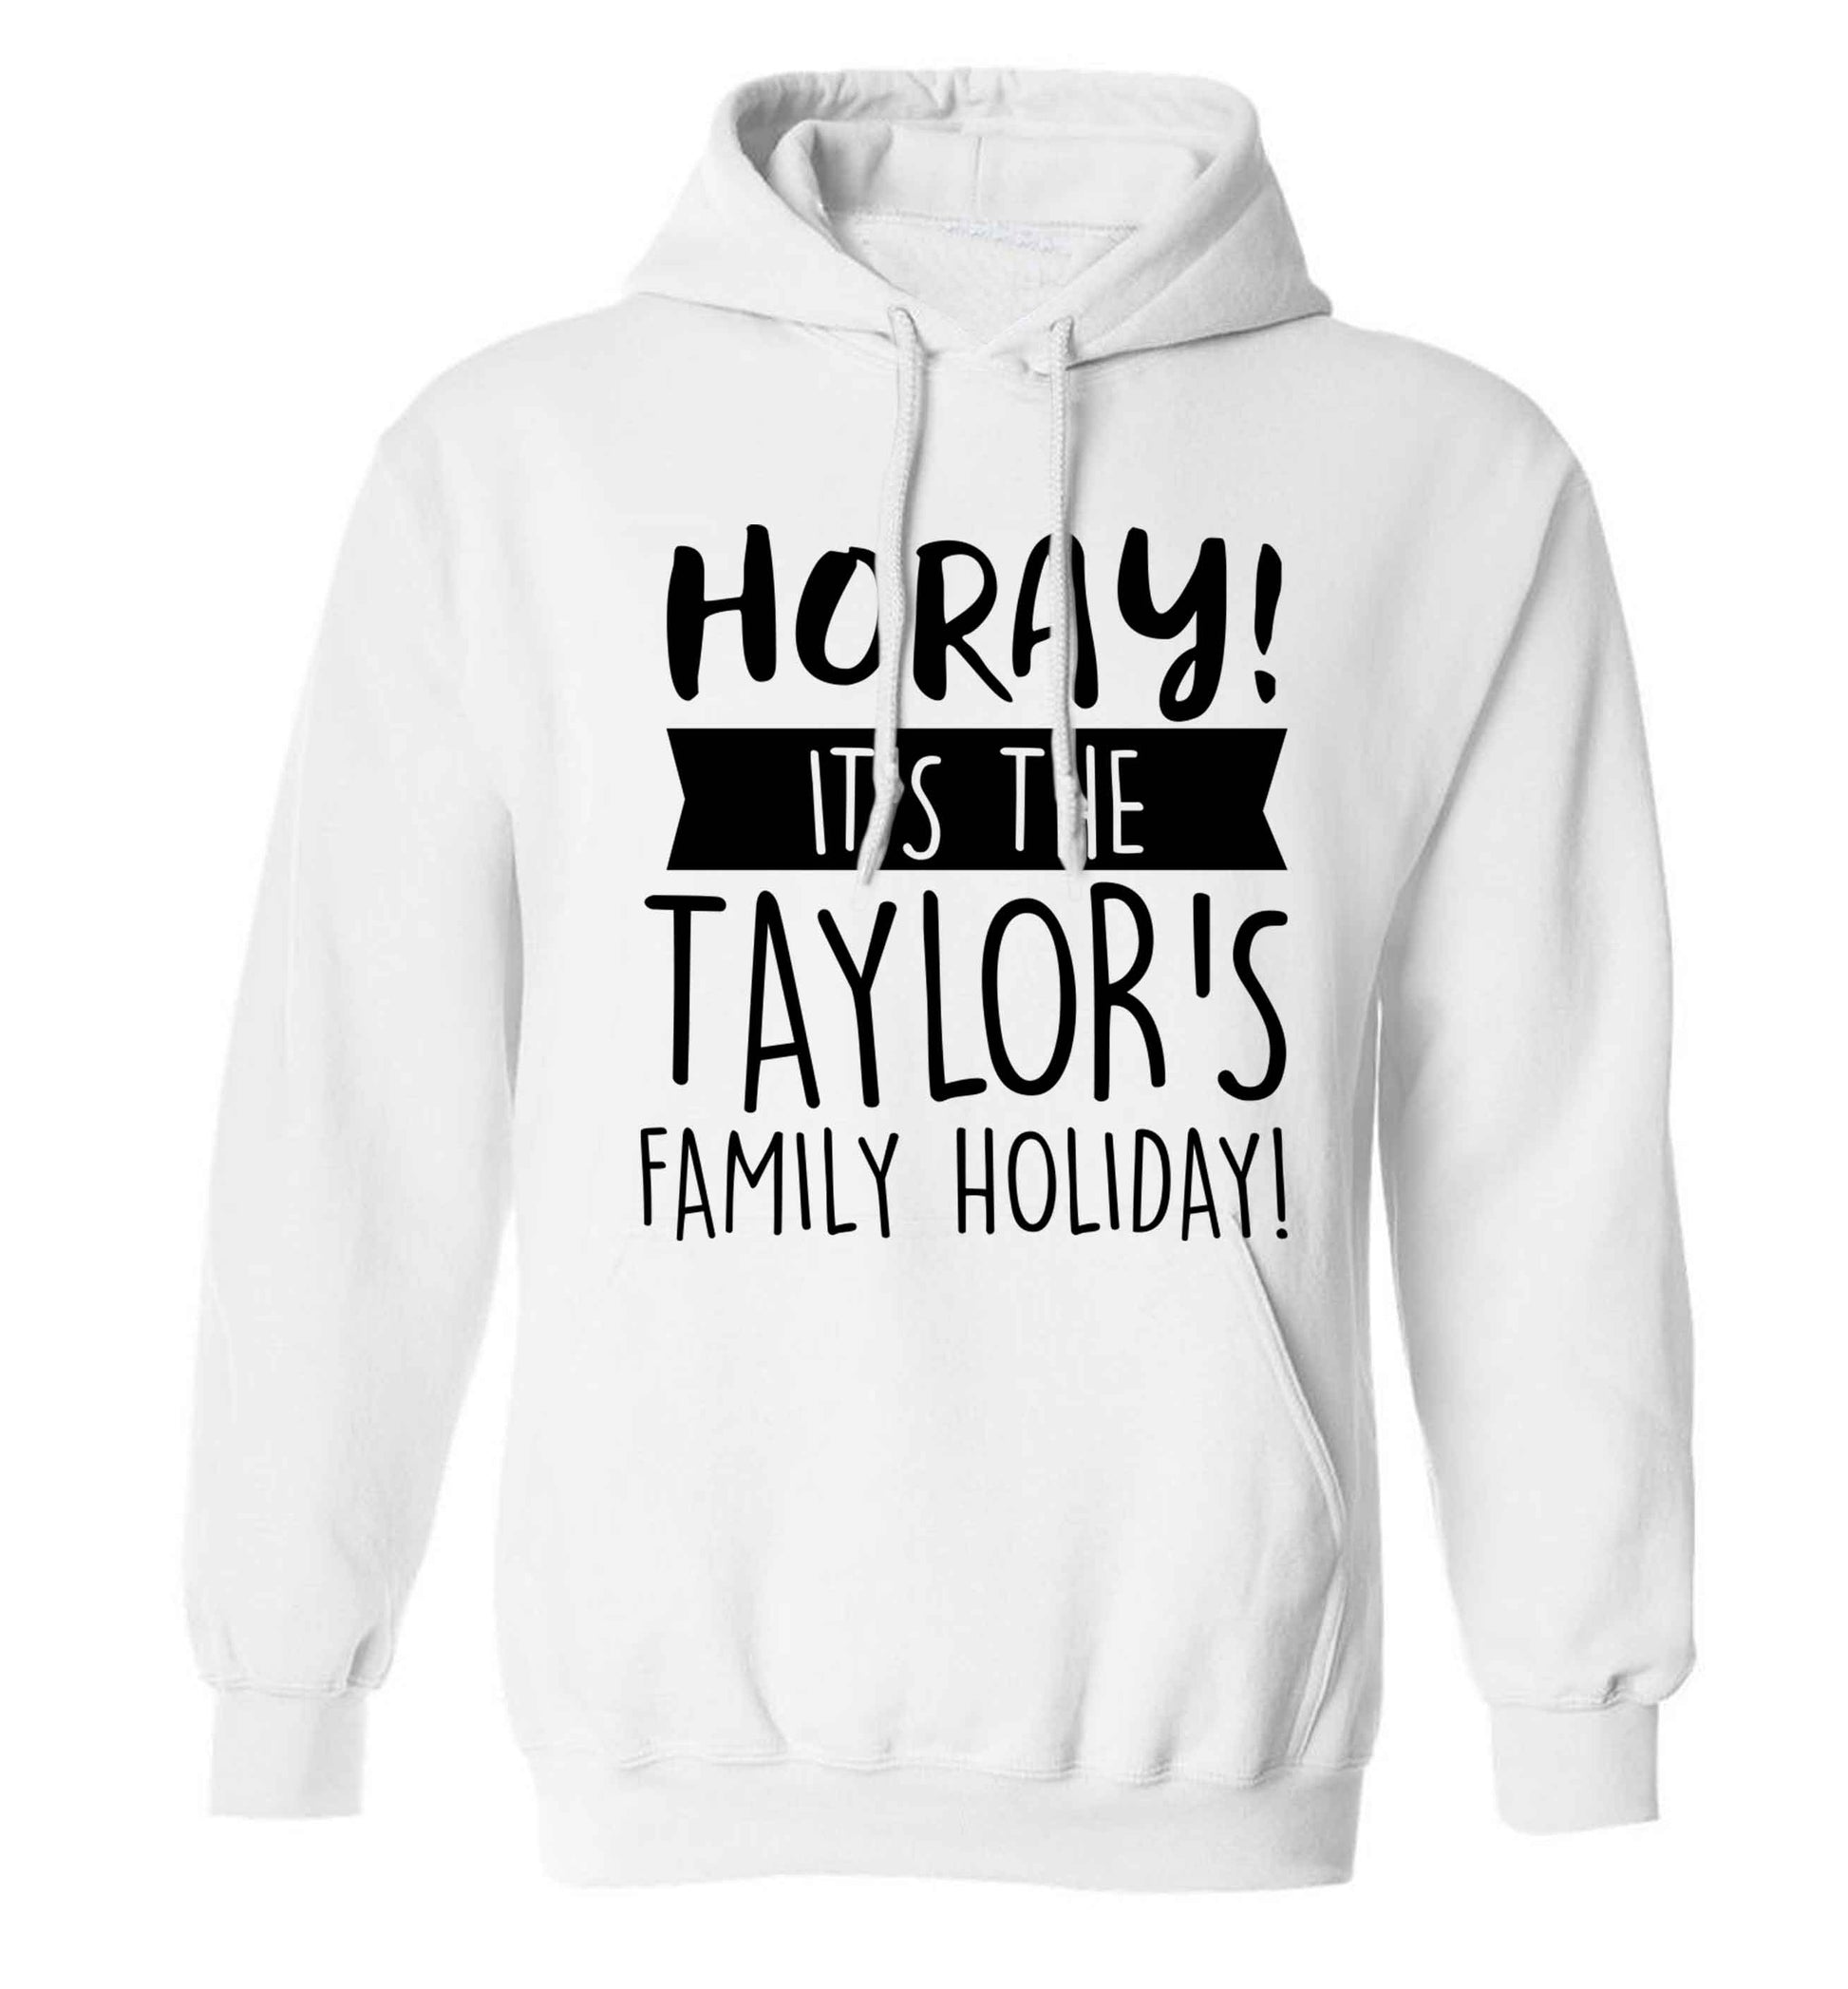 Horay it's the Taylor's family holiday! personalised item adults unisex white hoodie 2XL